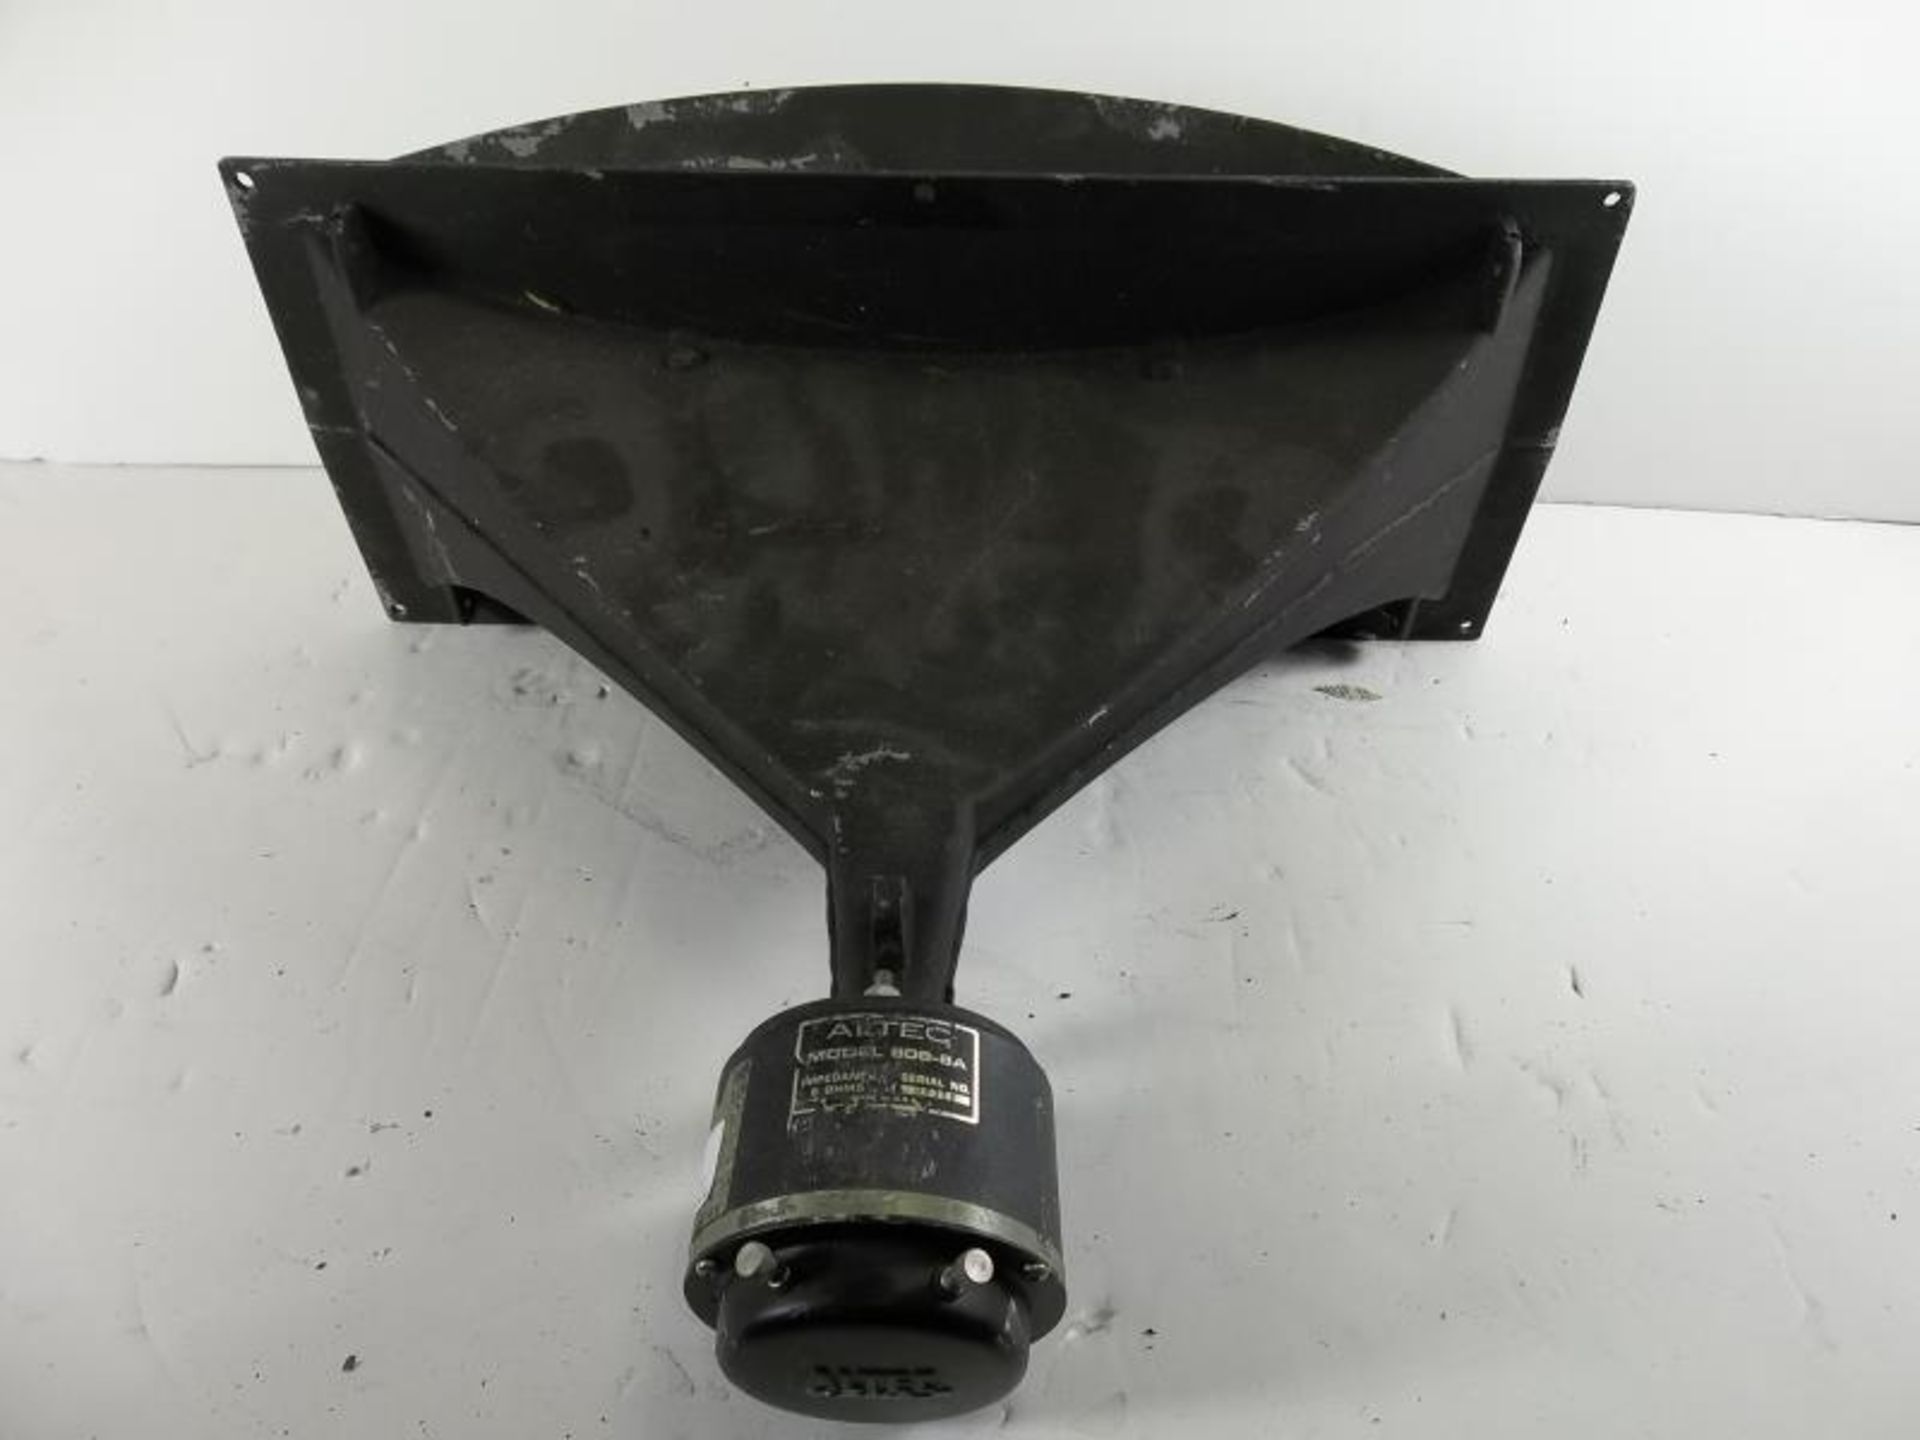 2 Altec theatre horns, black, driver is 808-A, horn is 26" x 10.5" - Image 2 of 7